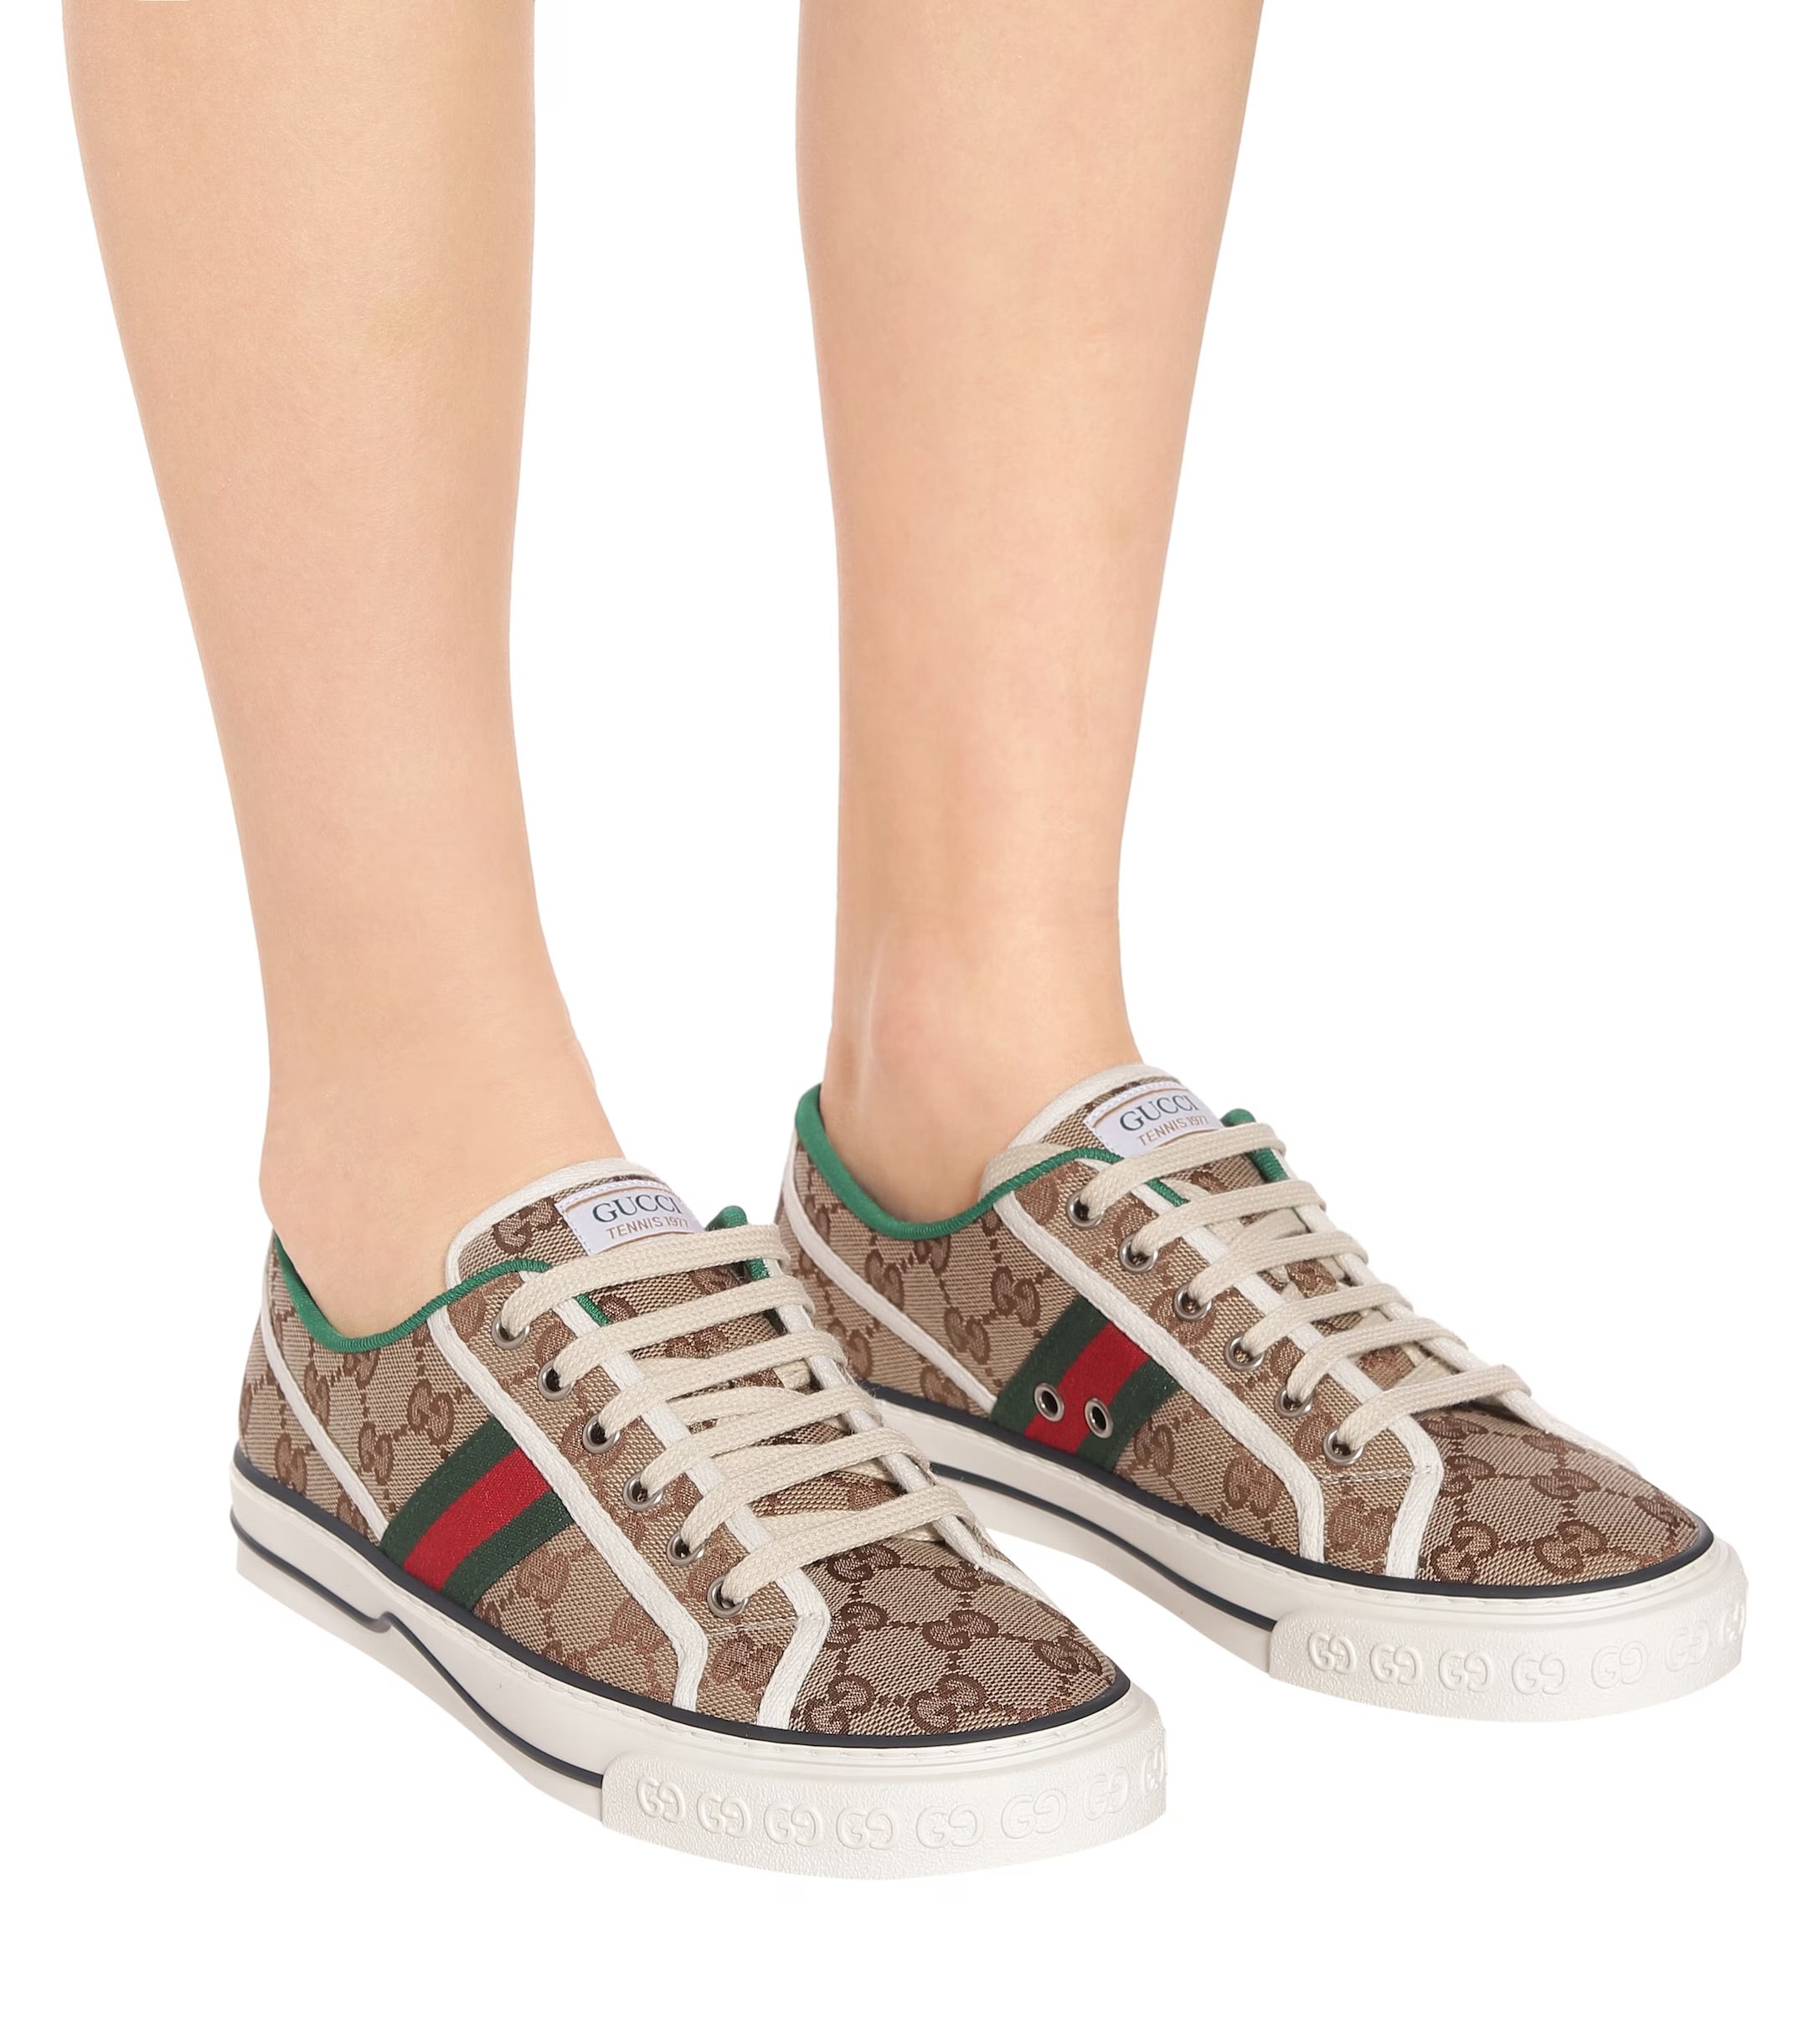 Gucci Tennis 1977 canvas sneakers